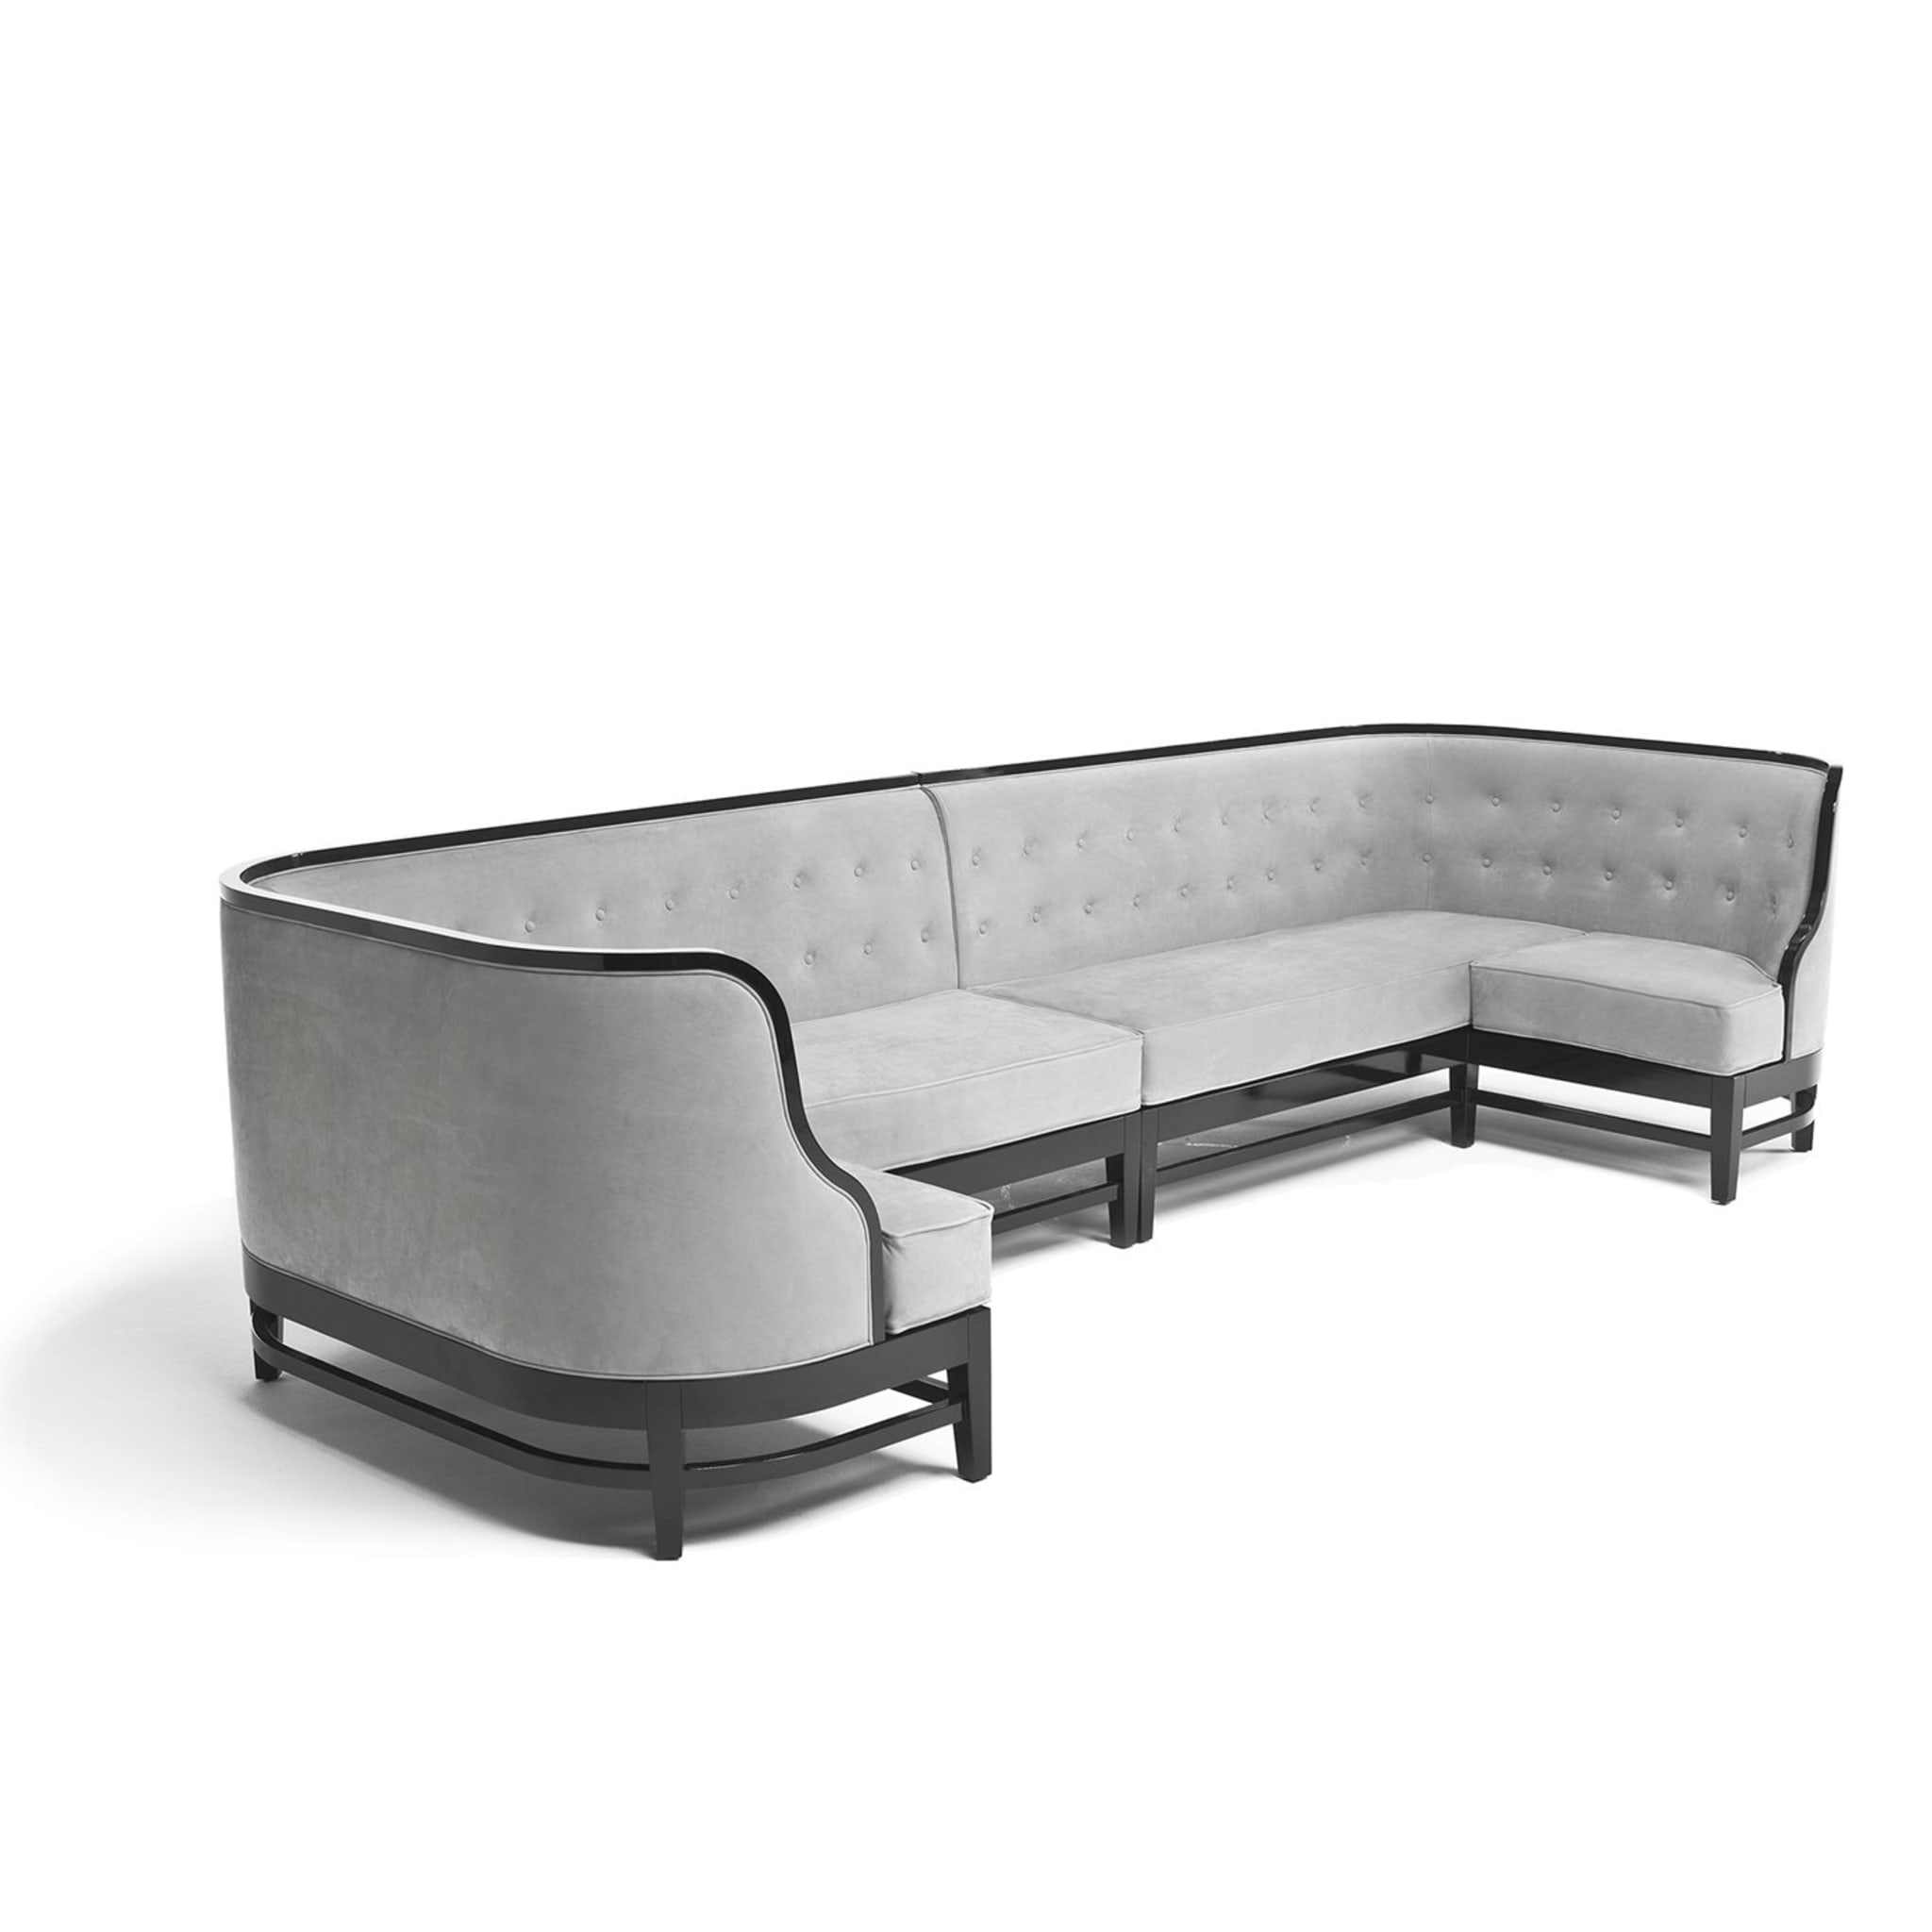 Siparia Sofa by Archer Humphryes Architects - Alternative view 1